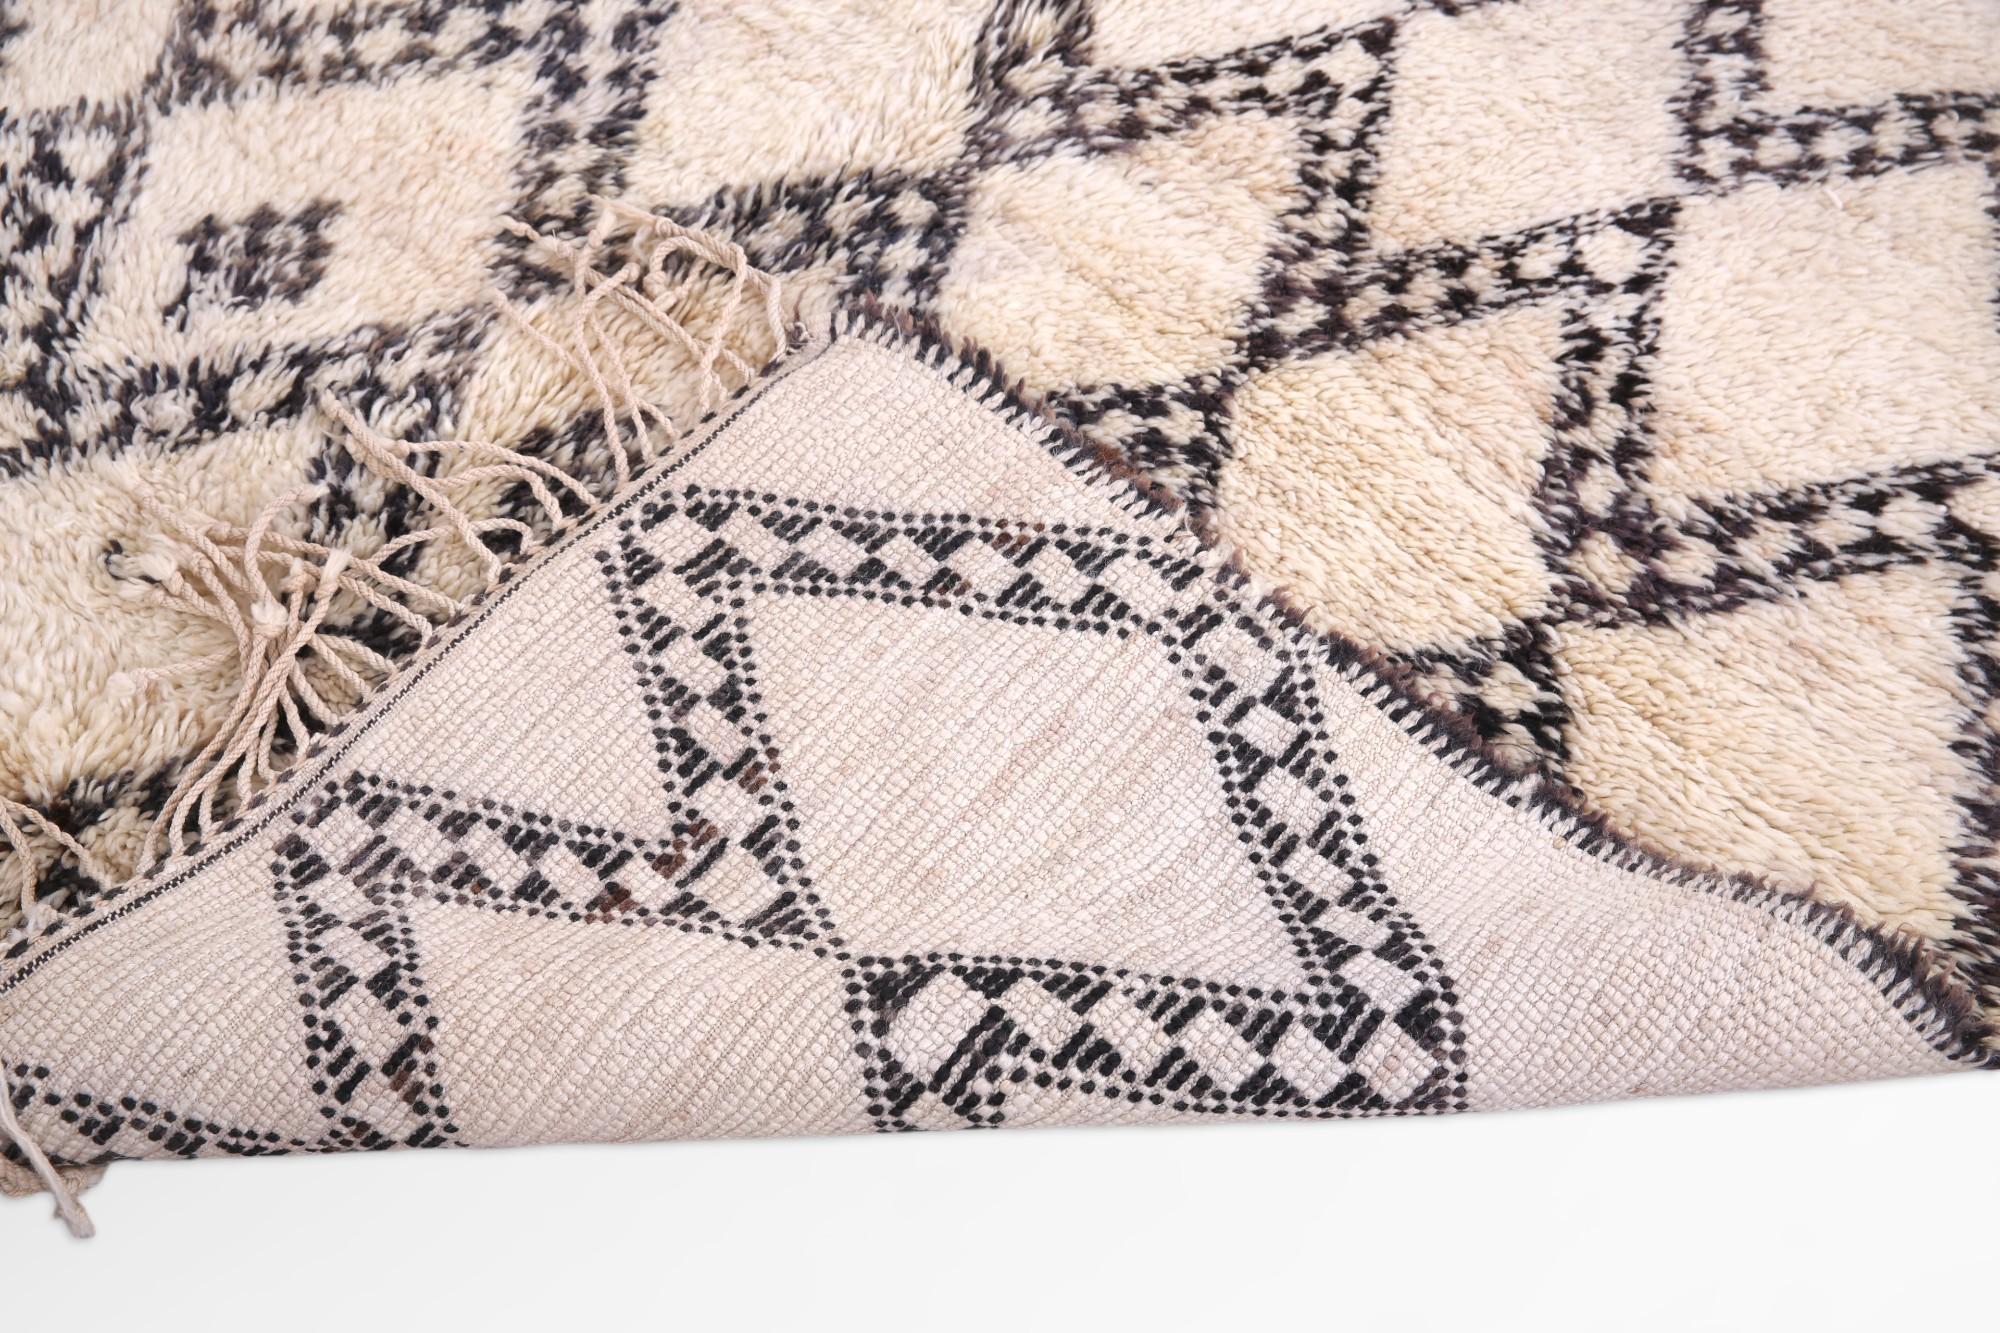 This Moroccan rug, handwoven with care by the artisans of the Beni Ourain tribe, stands as a testament to the nomadic elegance and detailed craftsmanship of its creators. Adorned with a distinctive lozenge trellis pattern against a backdrop of soft,